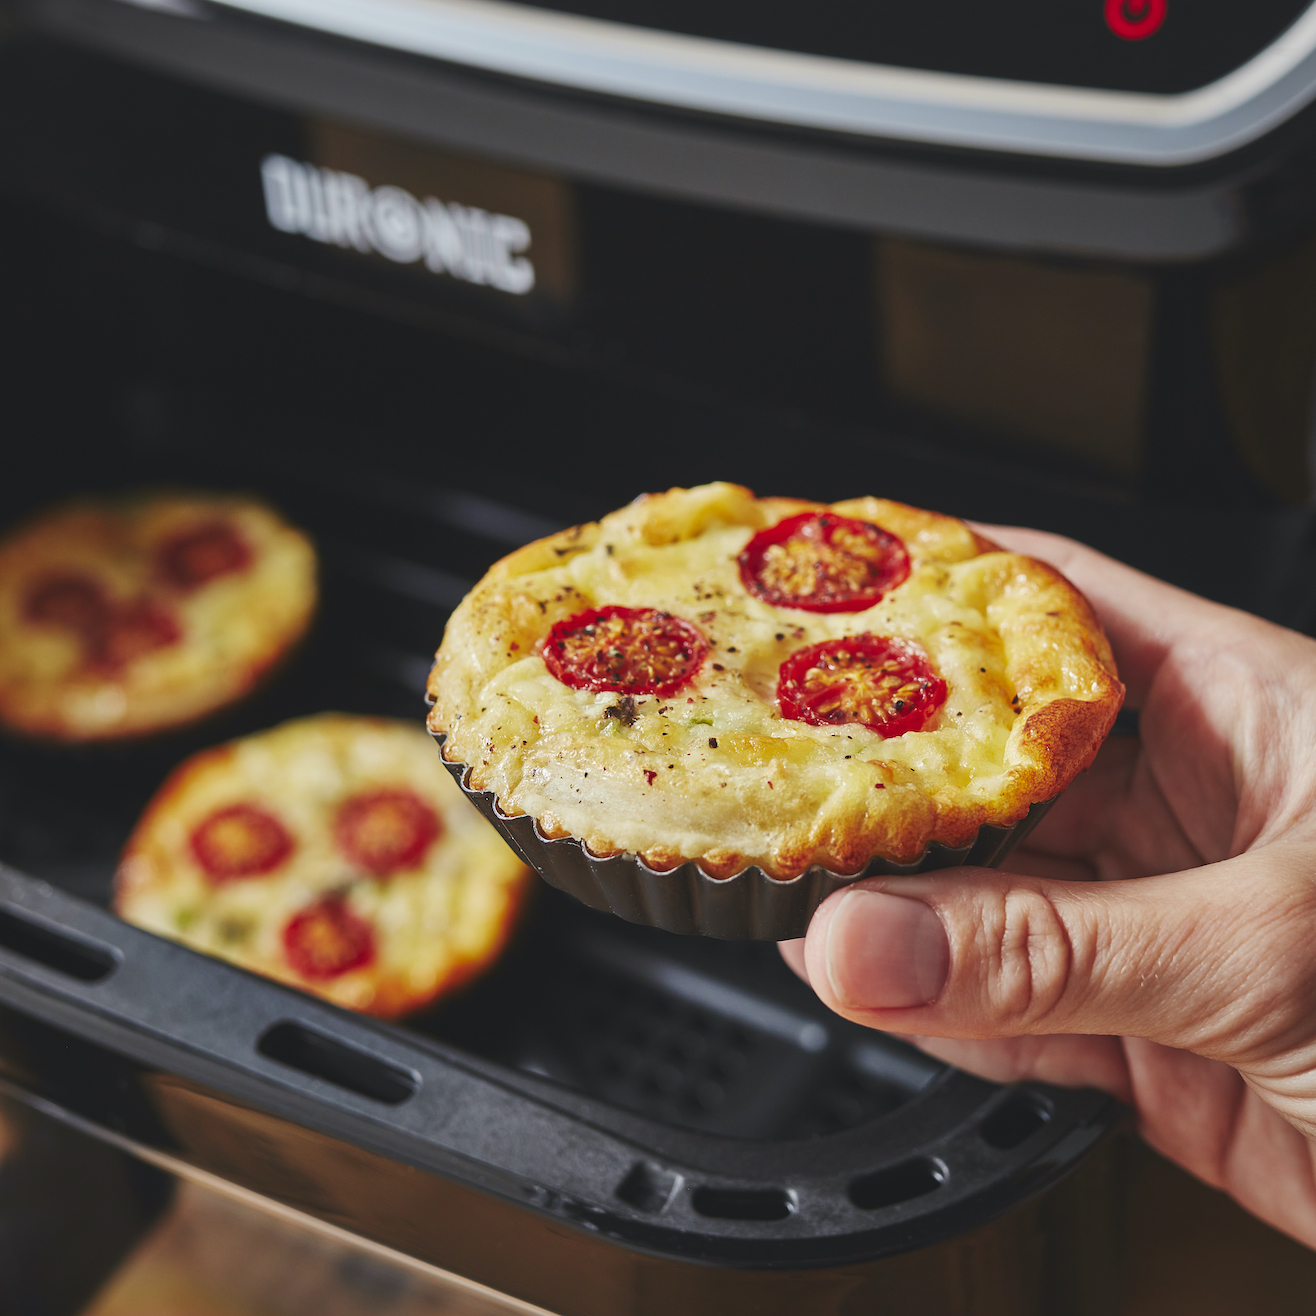 Air Fryer baking solved by What More’s superb new product range